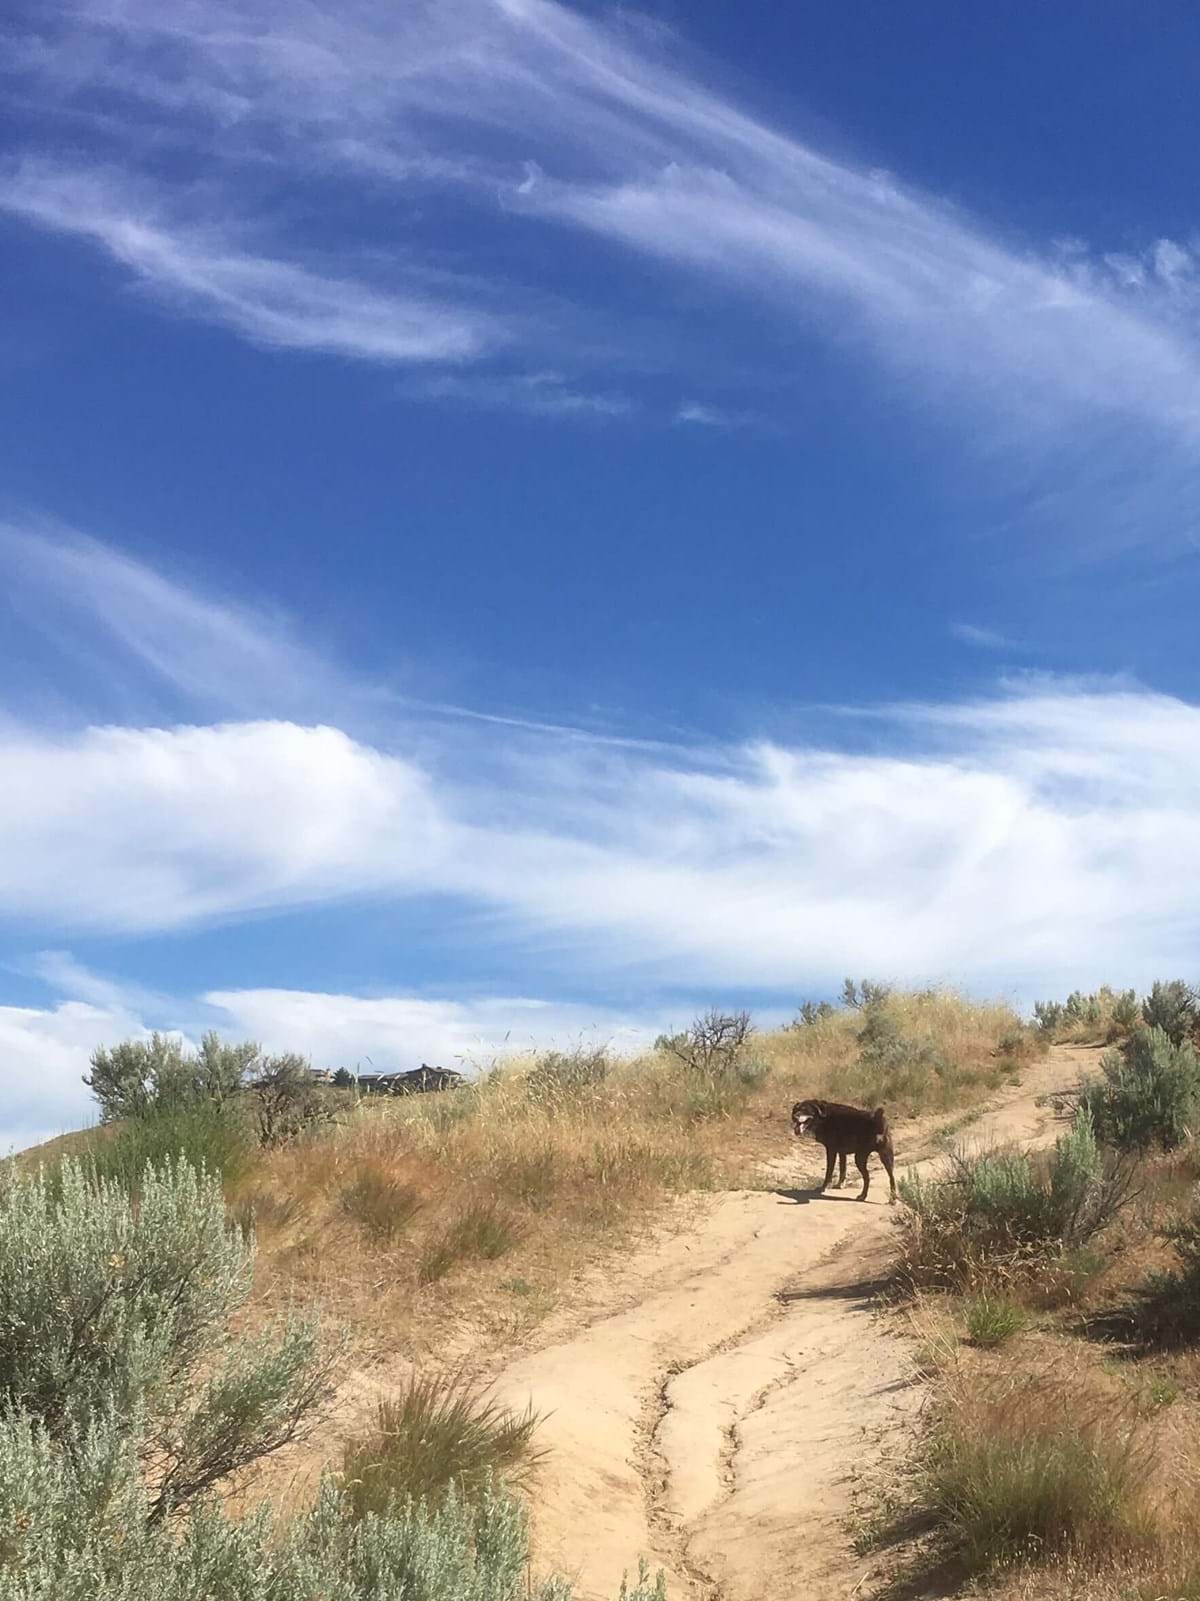 Dogs Off-Leash Parks and Areas | City of Boise